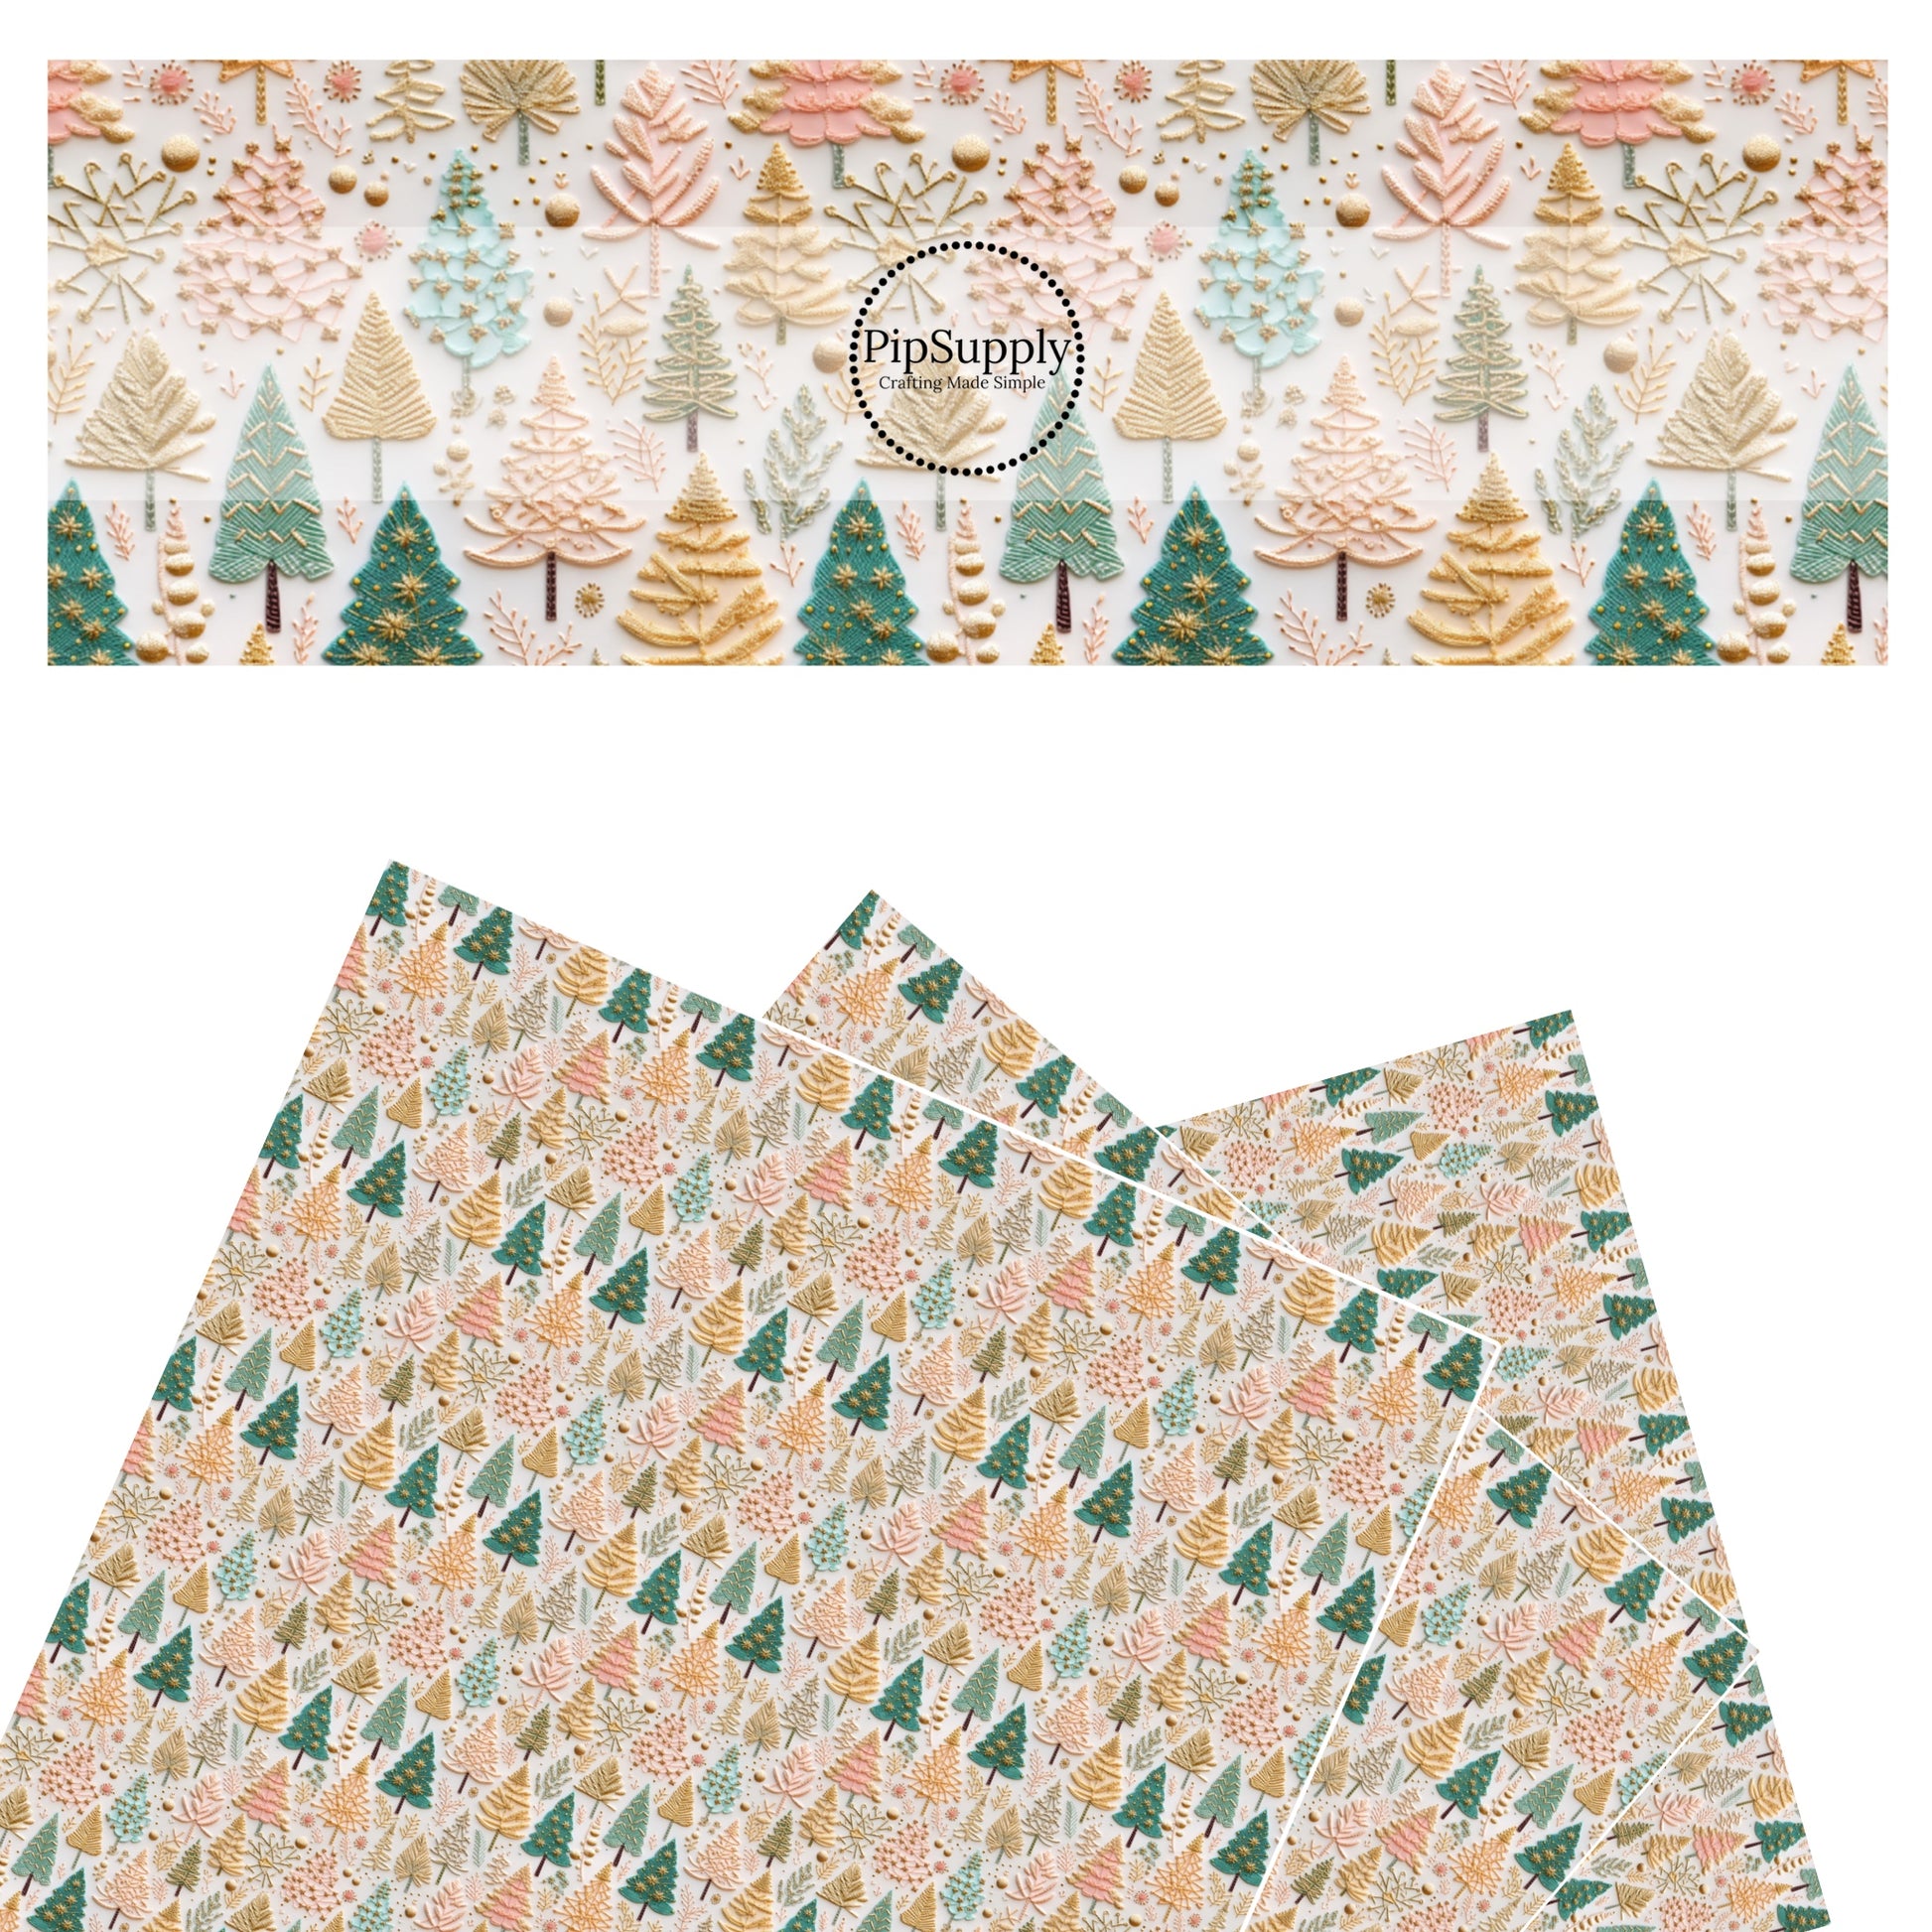 These holiday sewn pattern themed faux leather sheets contain the following design elements: green and pastel Christmas trees on cream. Our CPSIA compliant faux leather sheets or rolls can be used for all types of crafting projects.